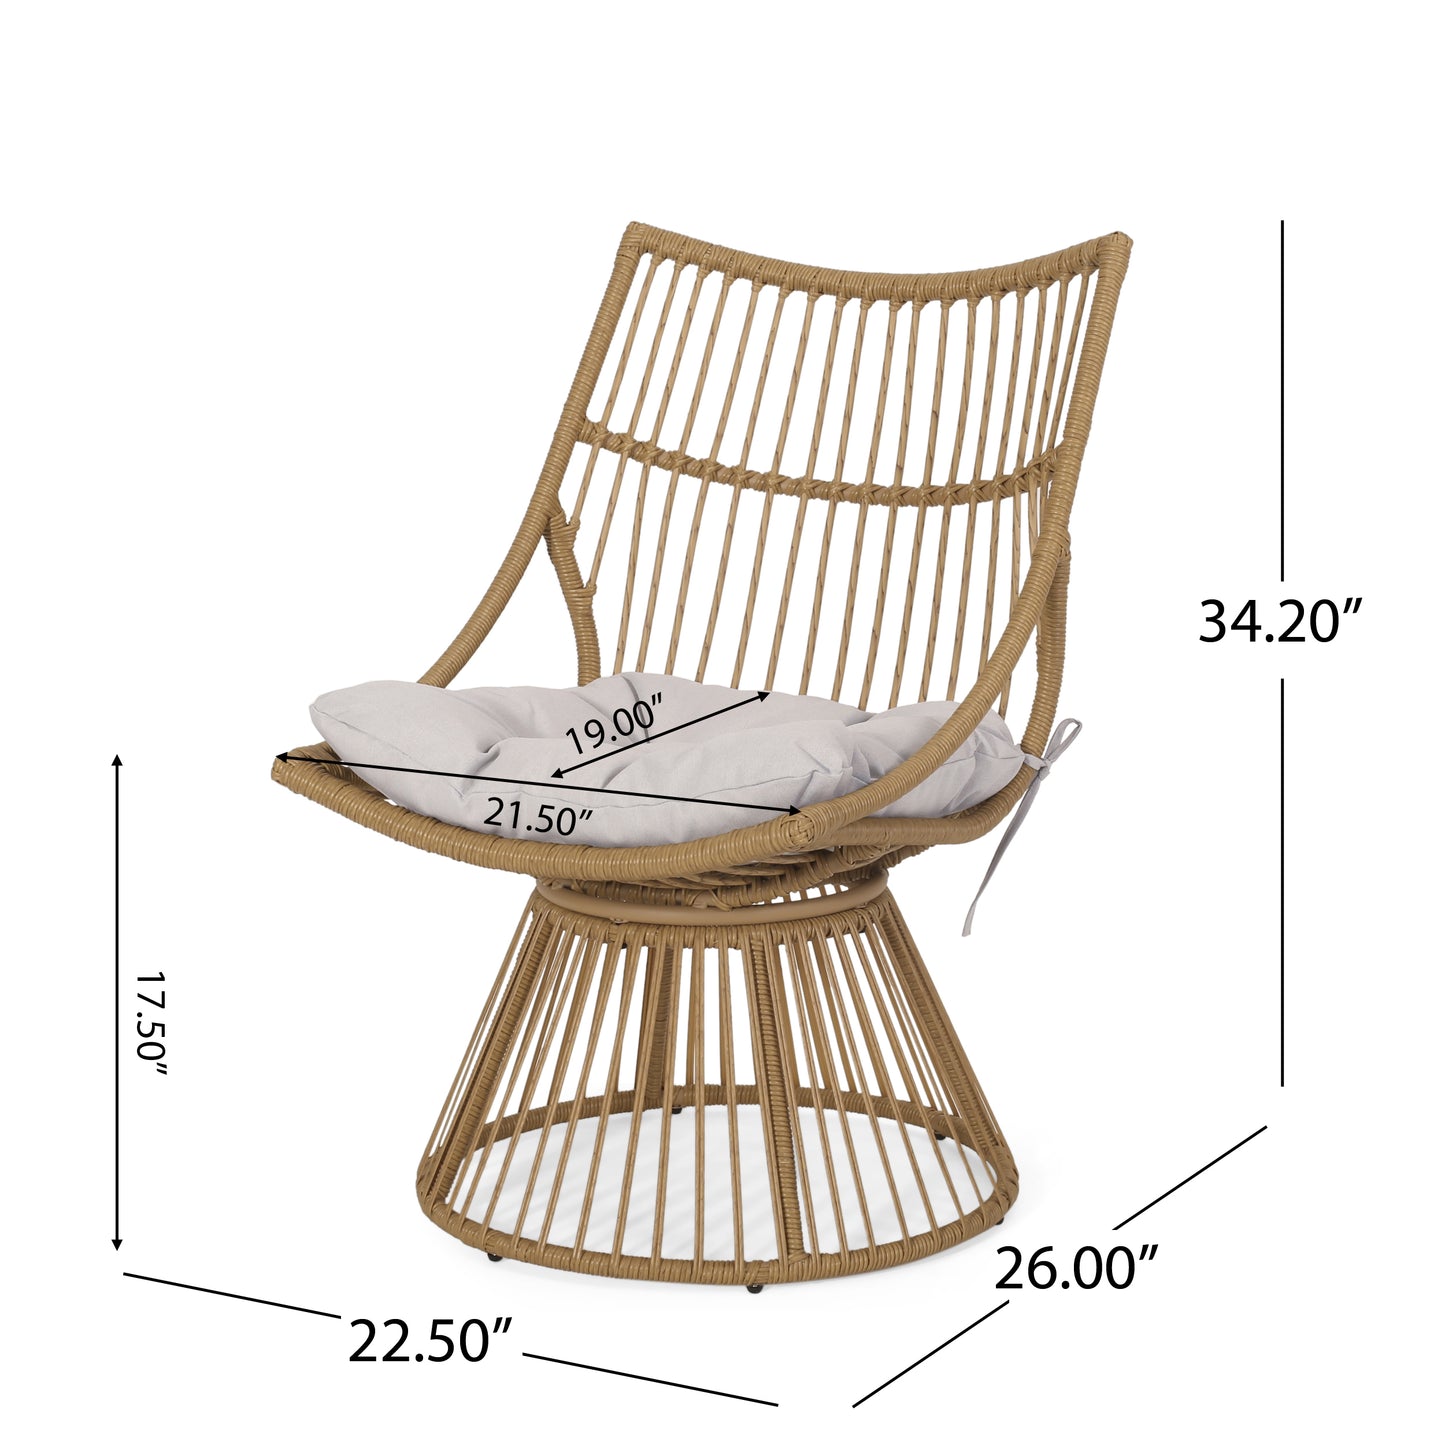 Apulia Outdoor Wicker High Back Lounge Chairs with Cushion, Set of 2, Light Brown and Beige